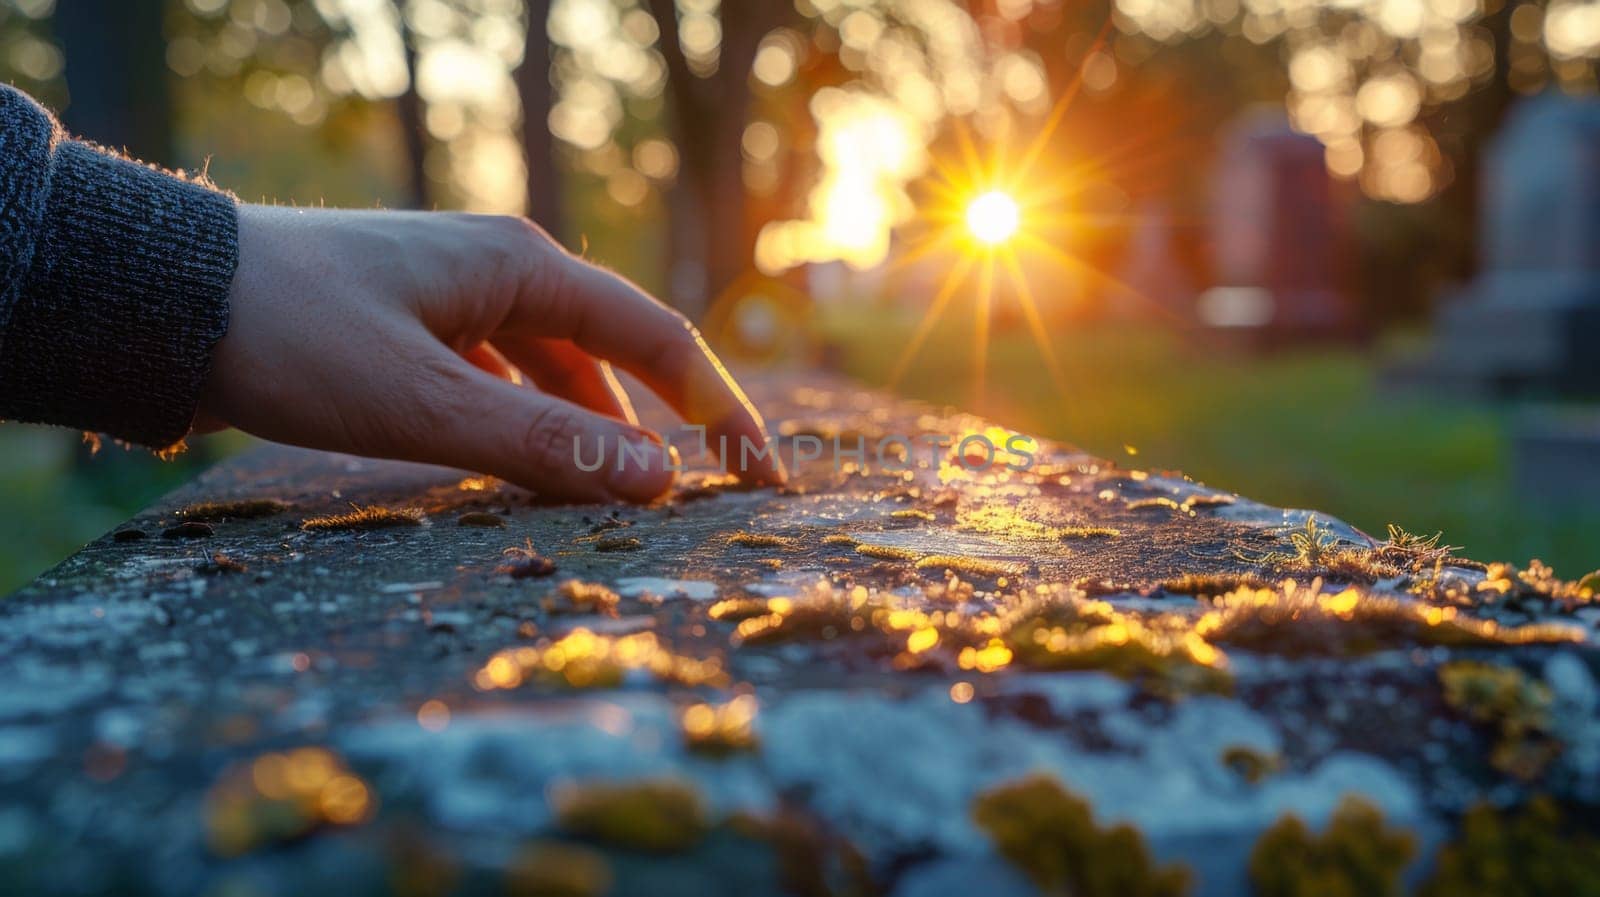 A person touching a stone with moss on it at sunset